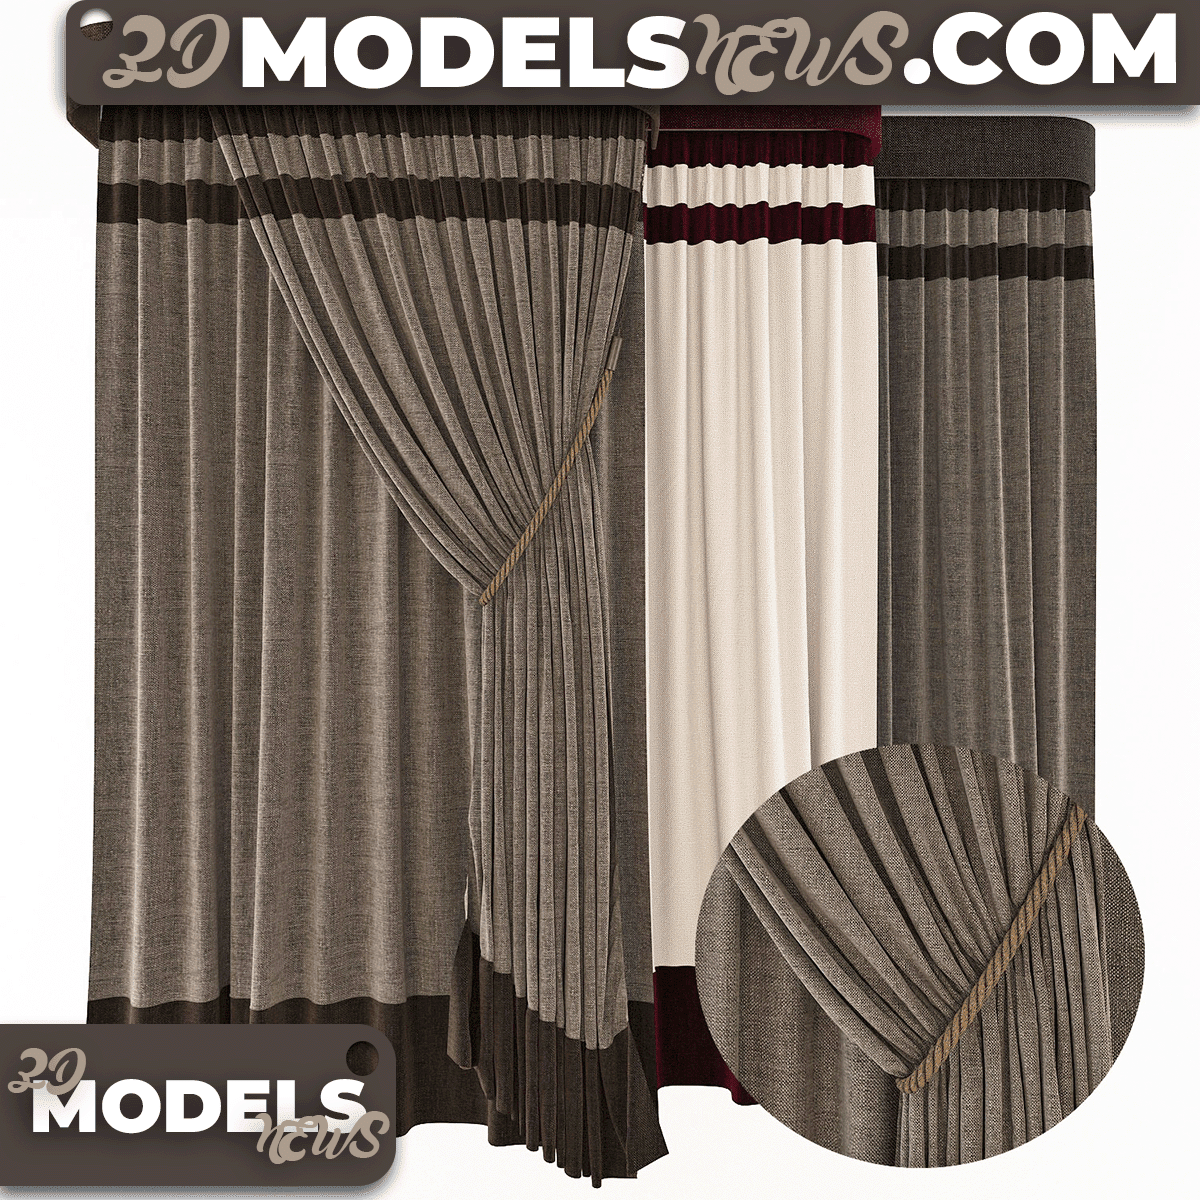 Three models of curtains in different colors 1